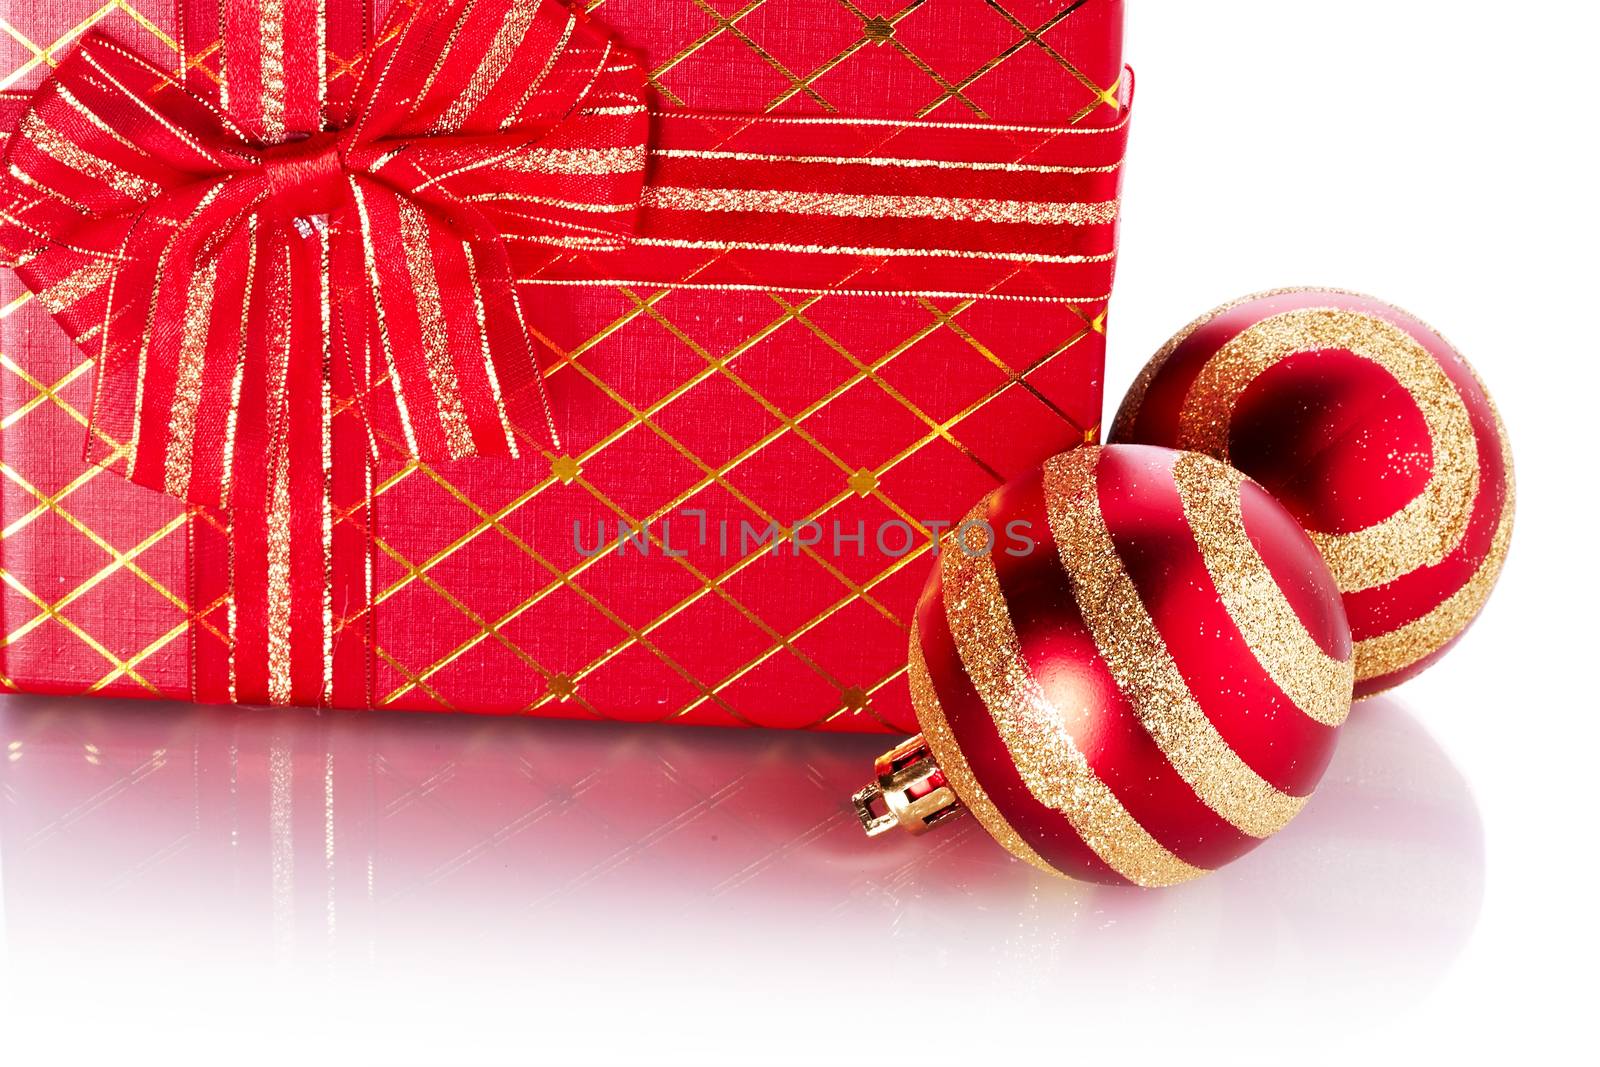 New Year's striped balls and gift. Gift box and Christmas balls. New Year's red balls. Christmas balls. Christmas tree decorations. Christmas jewelry.